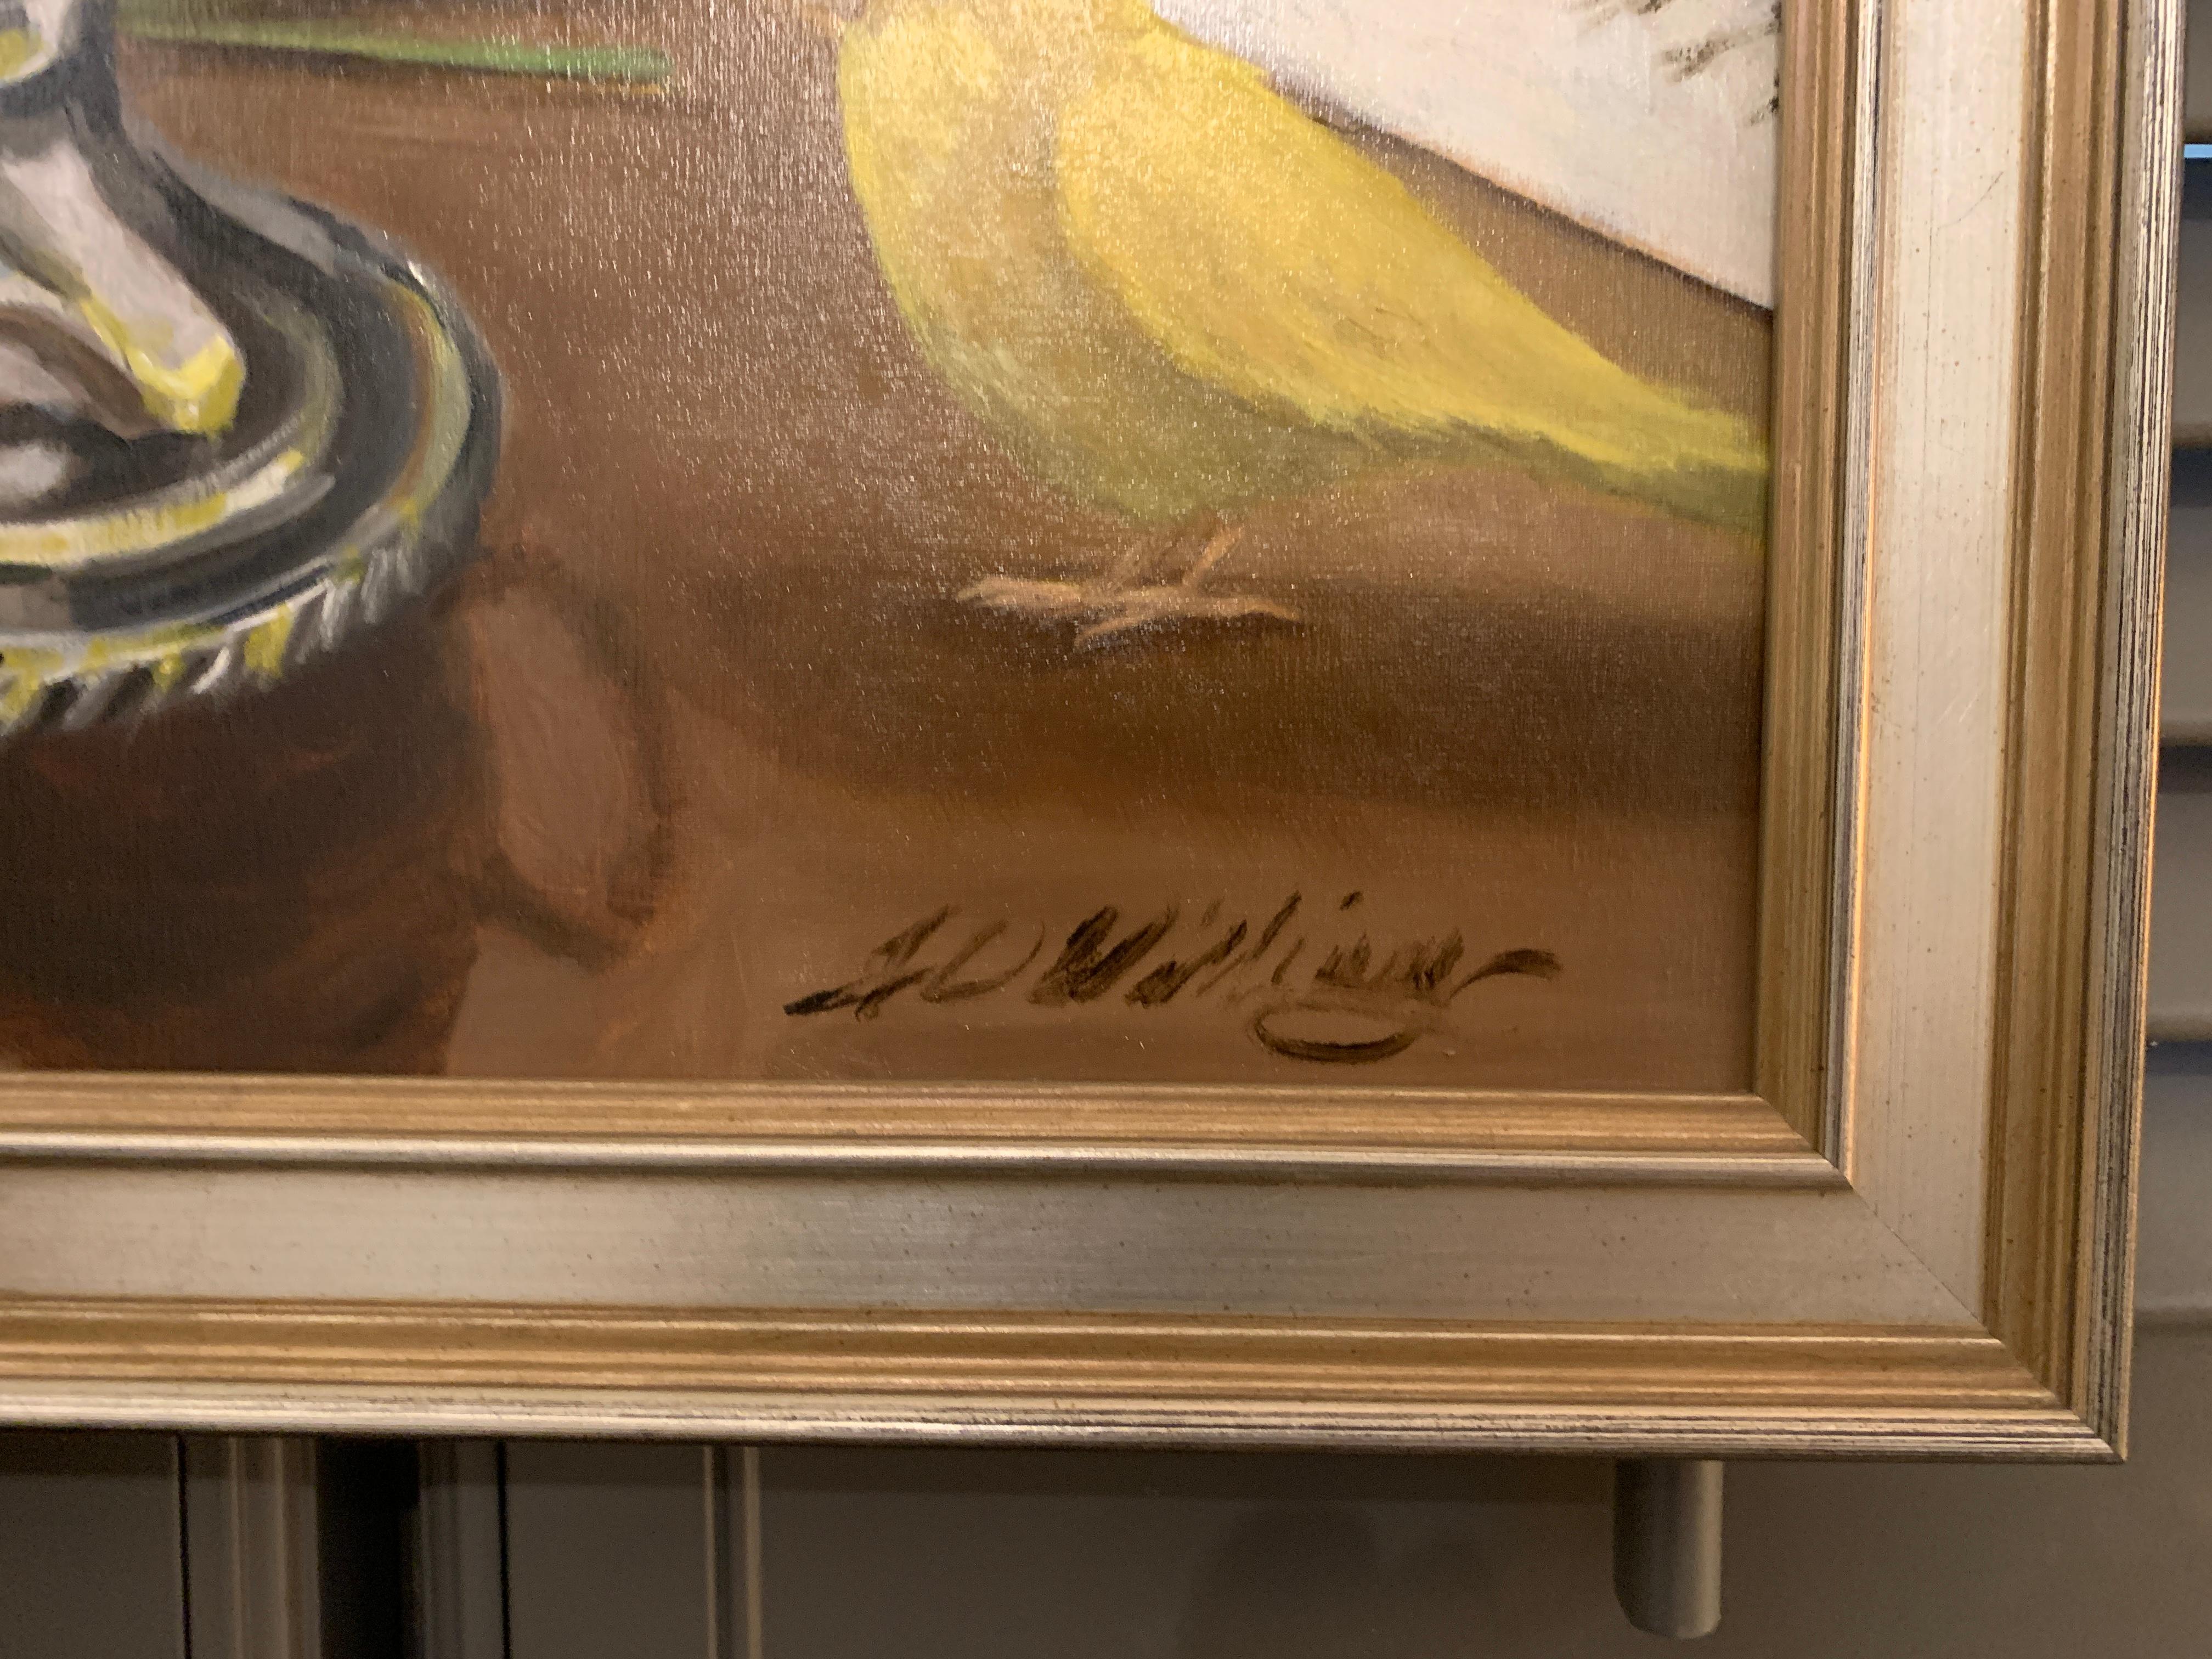 'Around the Water Cooler' is a medium framed oil on linen realist still-life painting created by American artist Ginny Williams in 2019. Featuring a dramatic and impactful palette made of black, yellow, brown and silver tones, the painting evokes